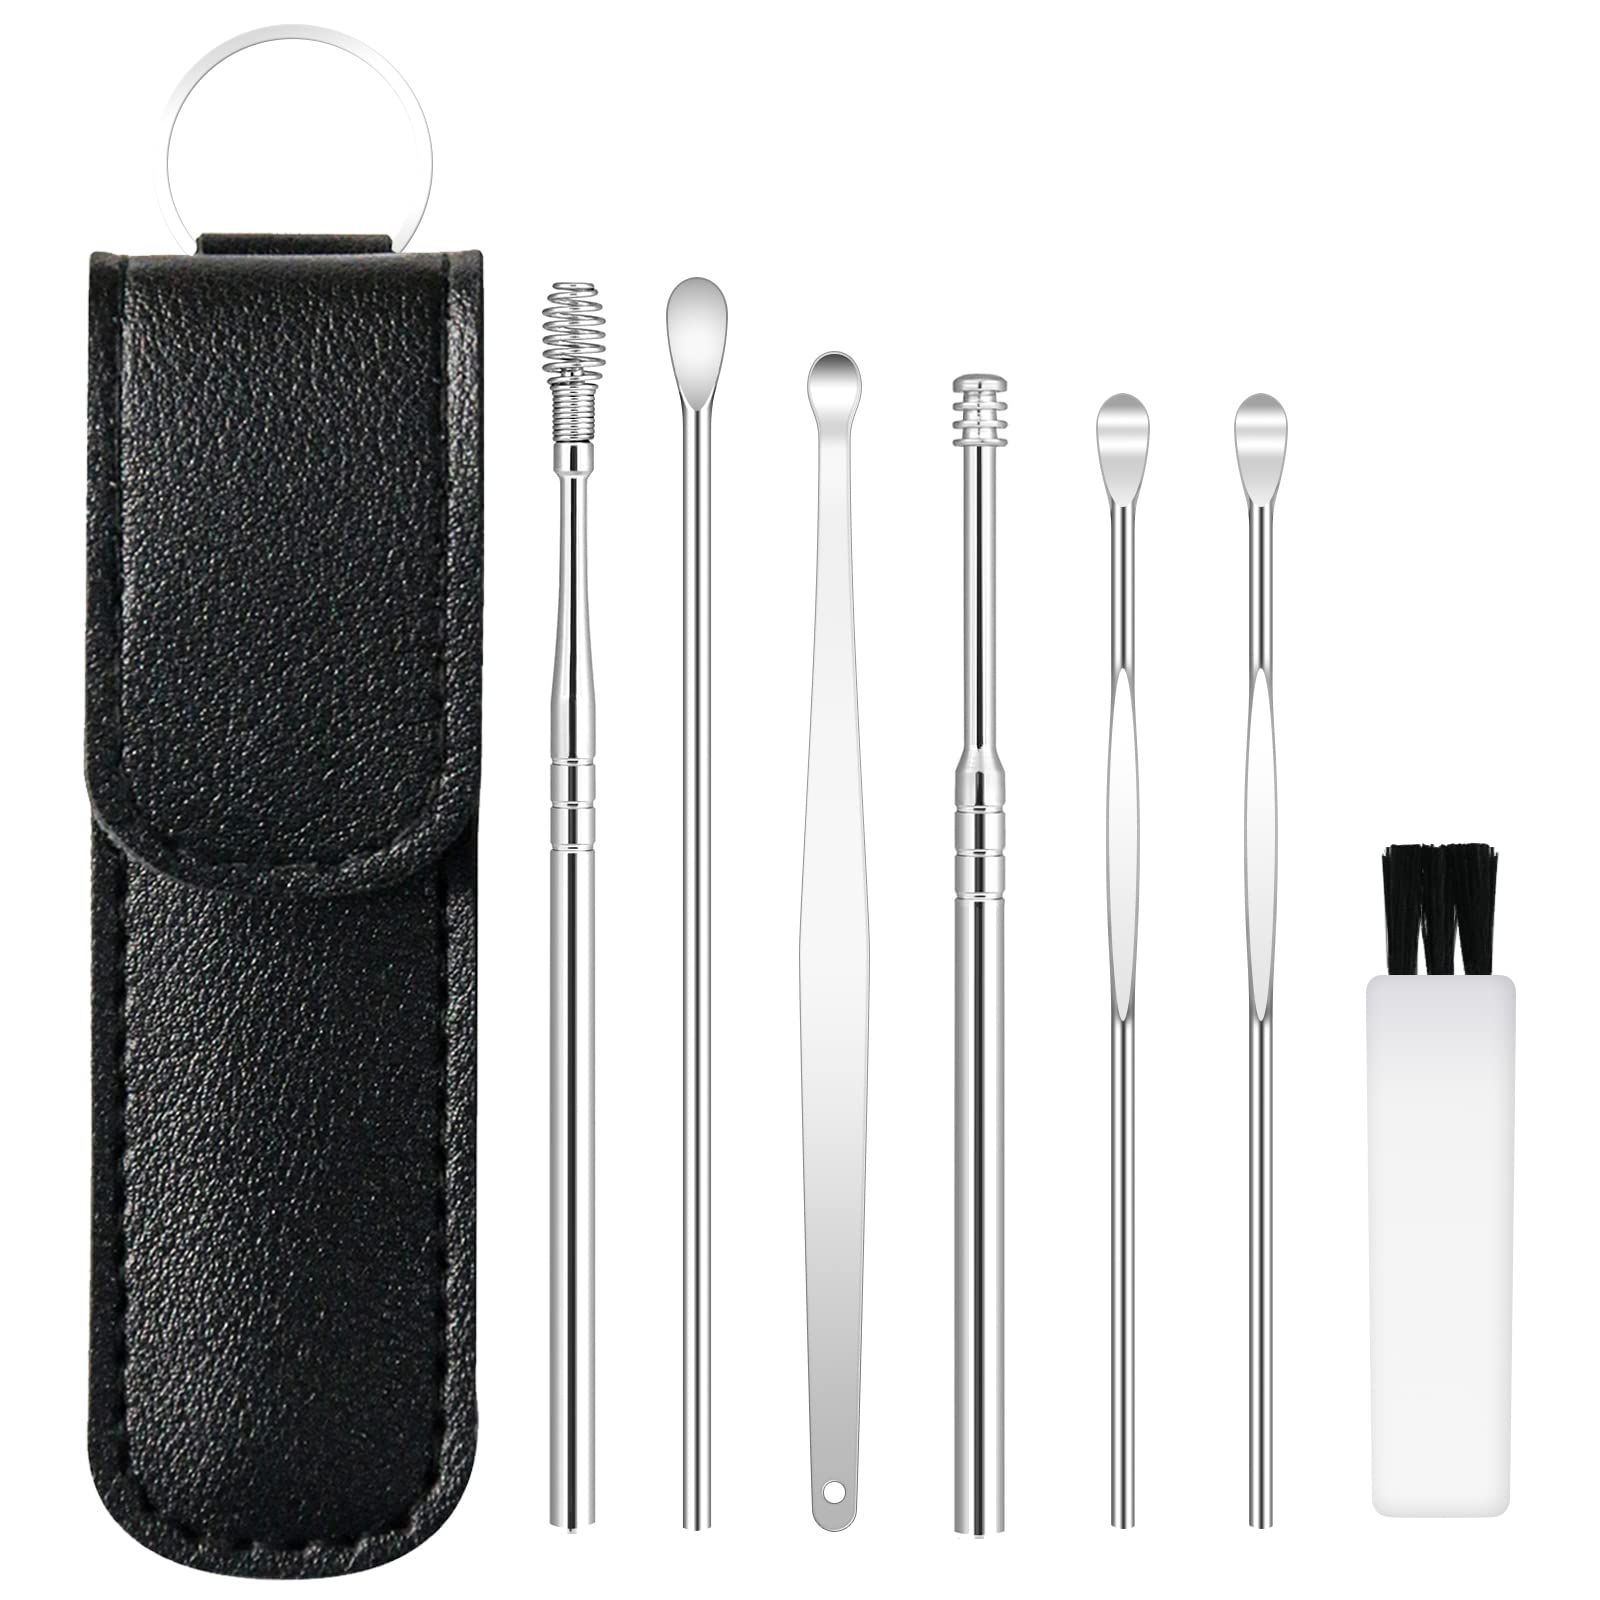 Earwax Cleaning Tool 6-Piece Set